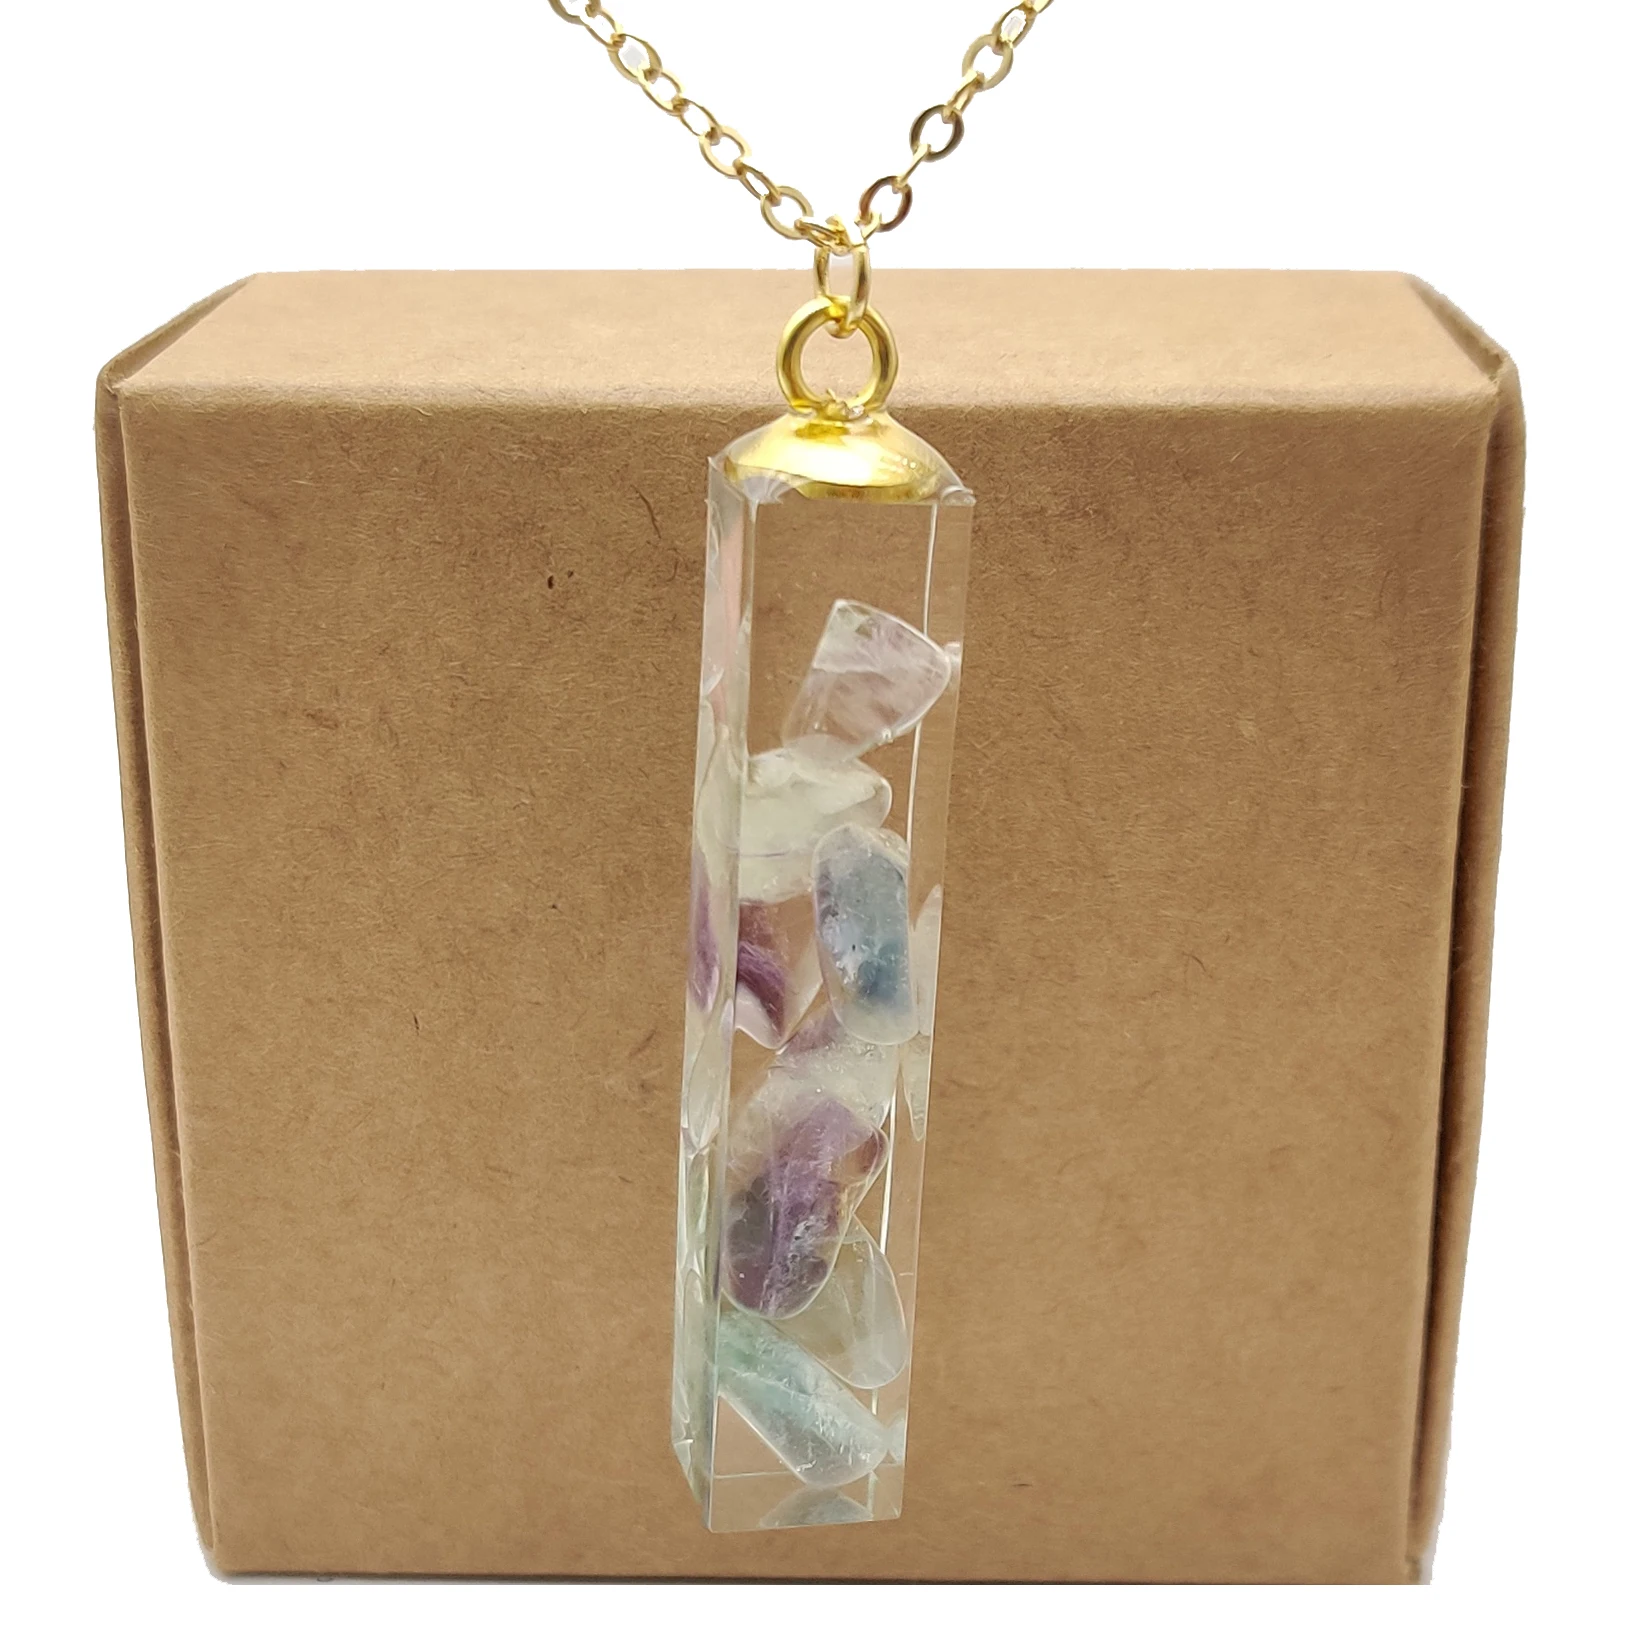 Fluorite Natural Stone Cube Resin Gold Color Pendant Chain Long Necklace Women Boho Fashion Jewelry Bohemian Vintage Handmade 10pcs natural volcano lava stone cube square 8mm 10mm loose crafts beads lot for jewelry making diy bracelet findings